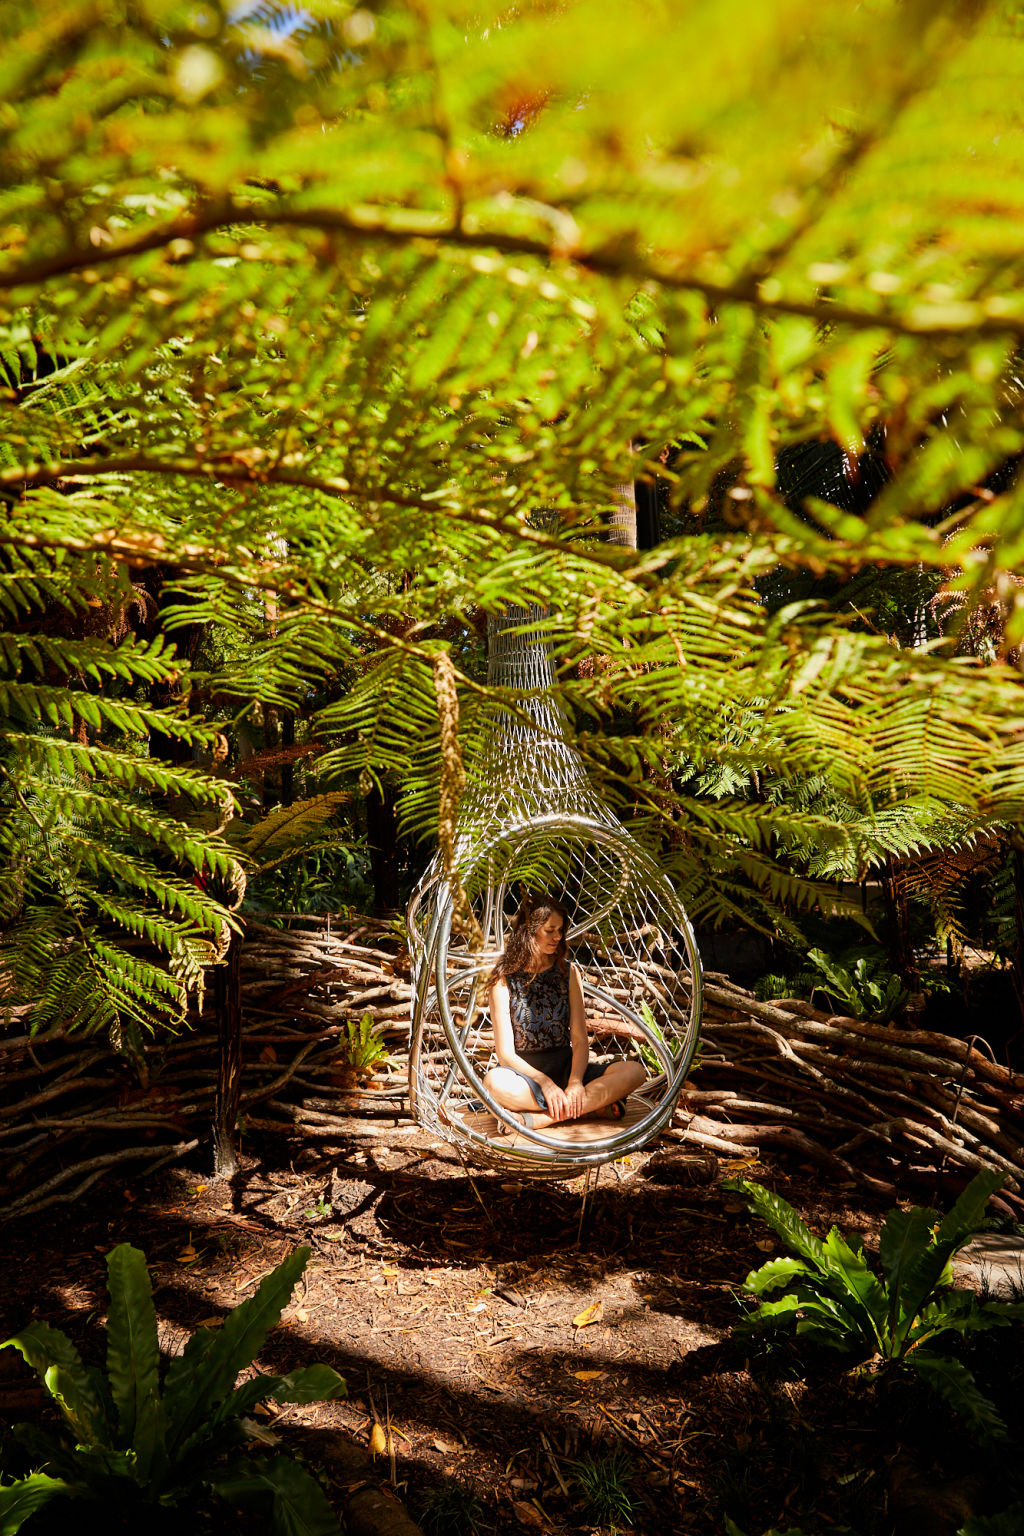 Designer David Wong and landscape architect Andrew Laidlaw created this whimsical space, reminiscent of 'a butterfly’s chrysalis'. Photo: The Royal Botanic Gardens